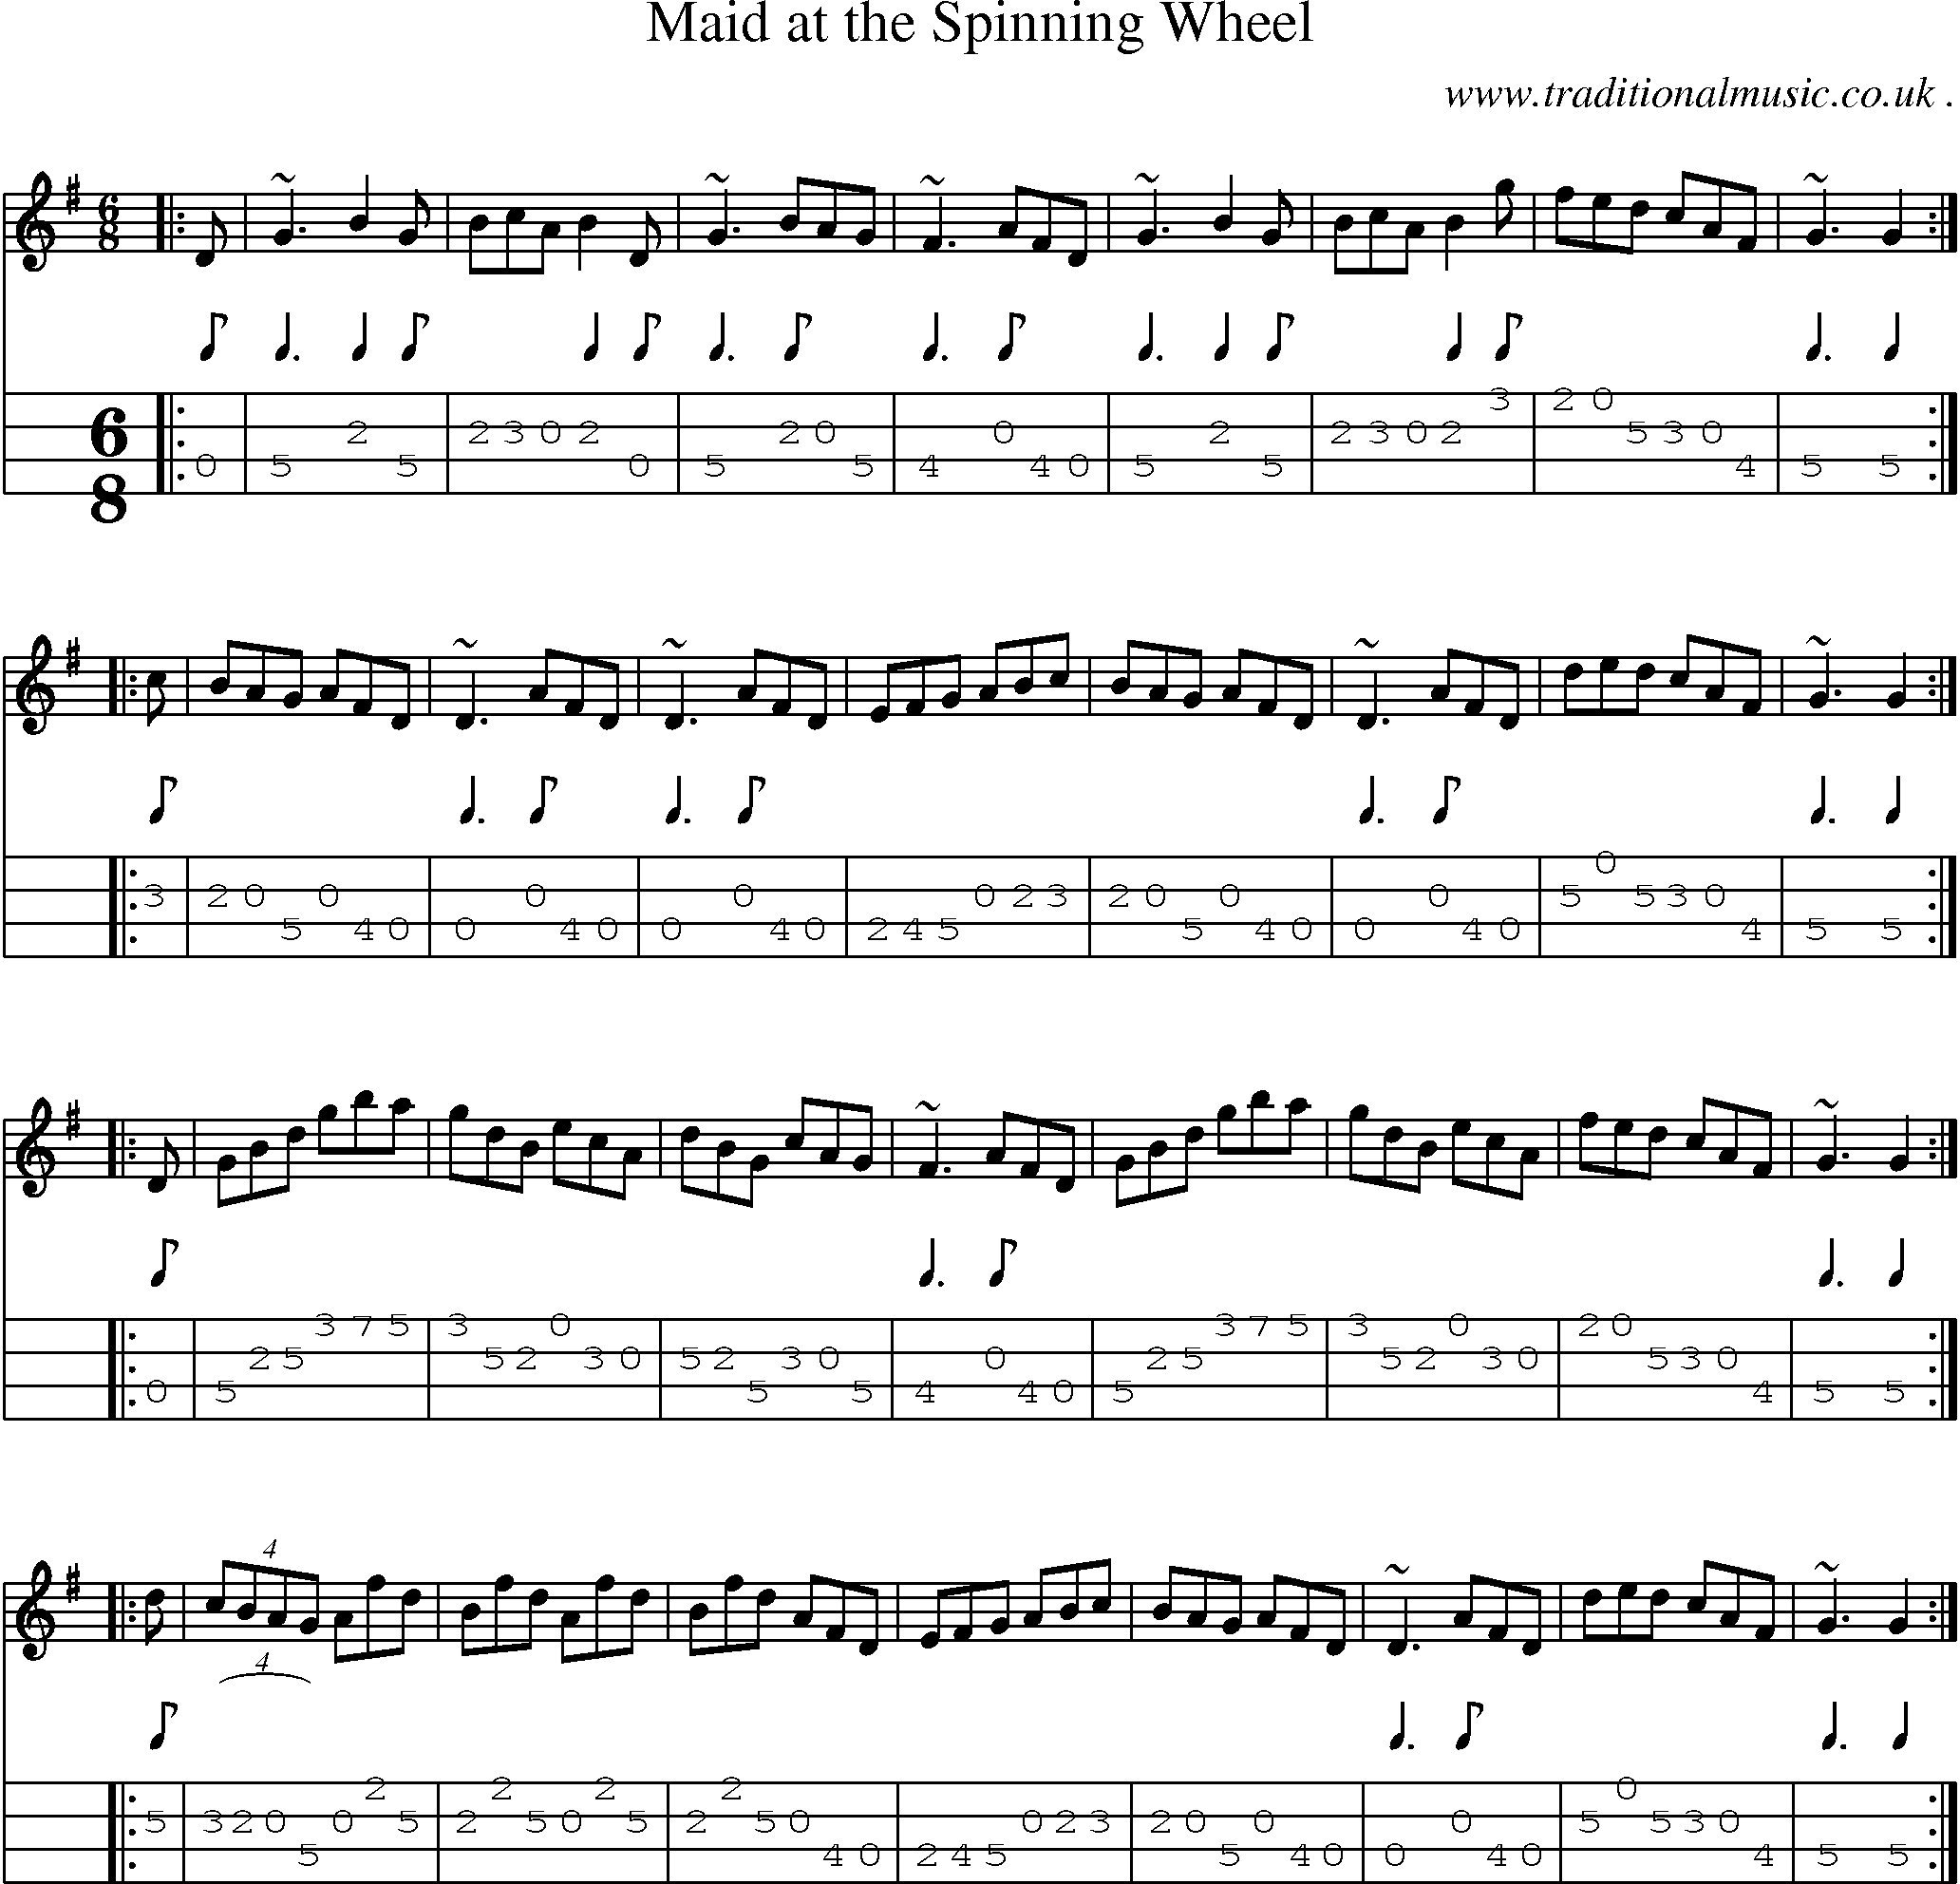 Sheet-music  score, Chords and Mandolin Tabs for Maid At The Spinning Wheel